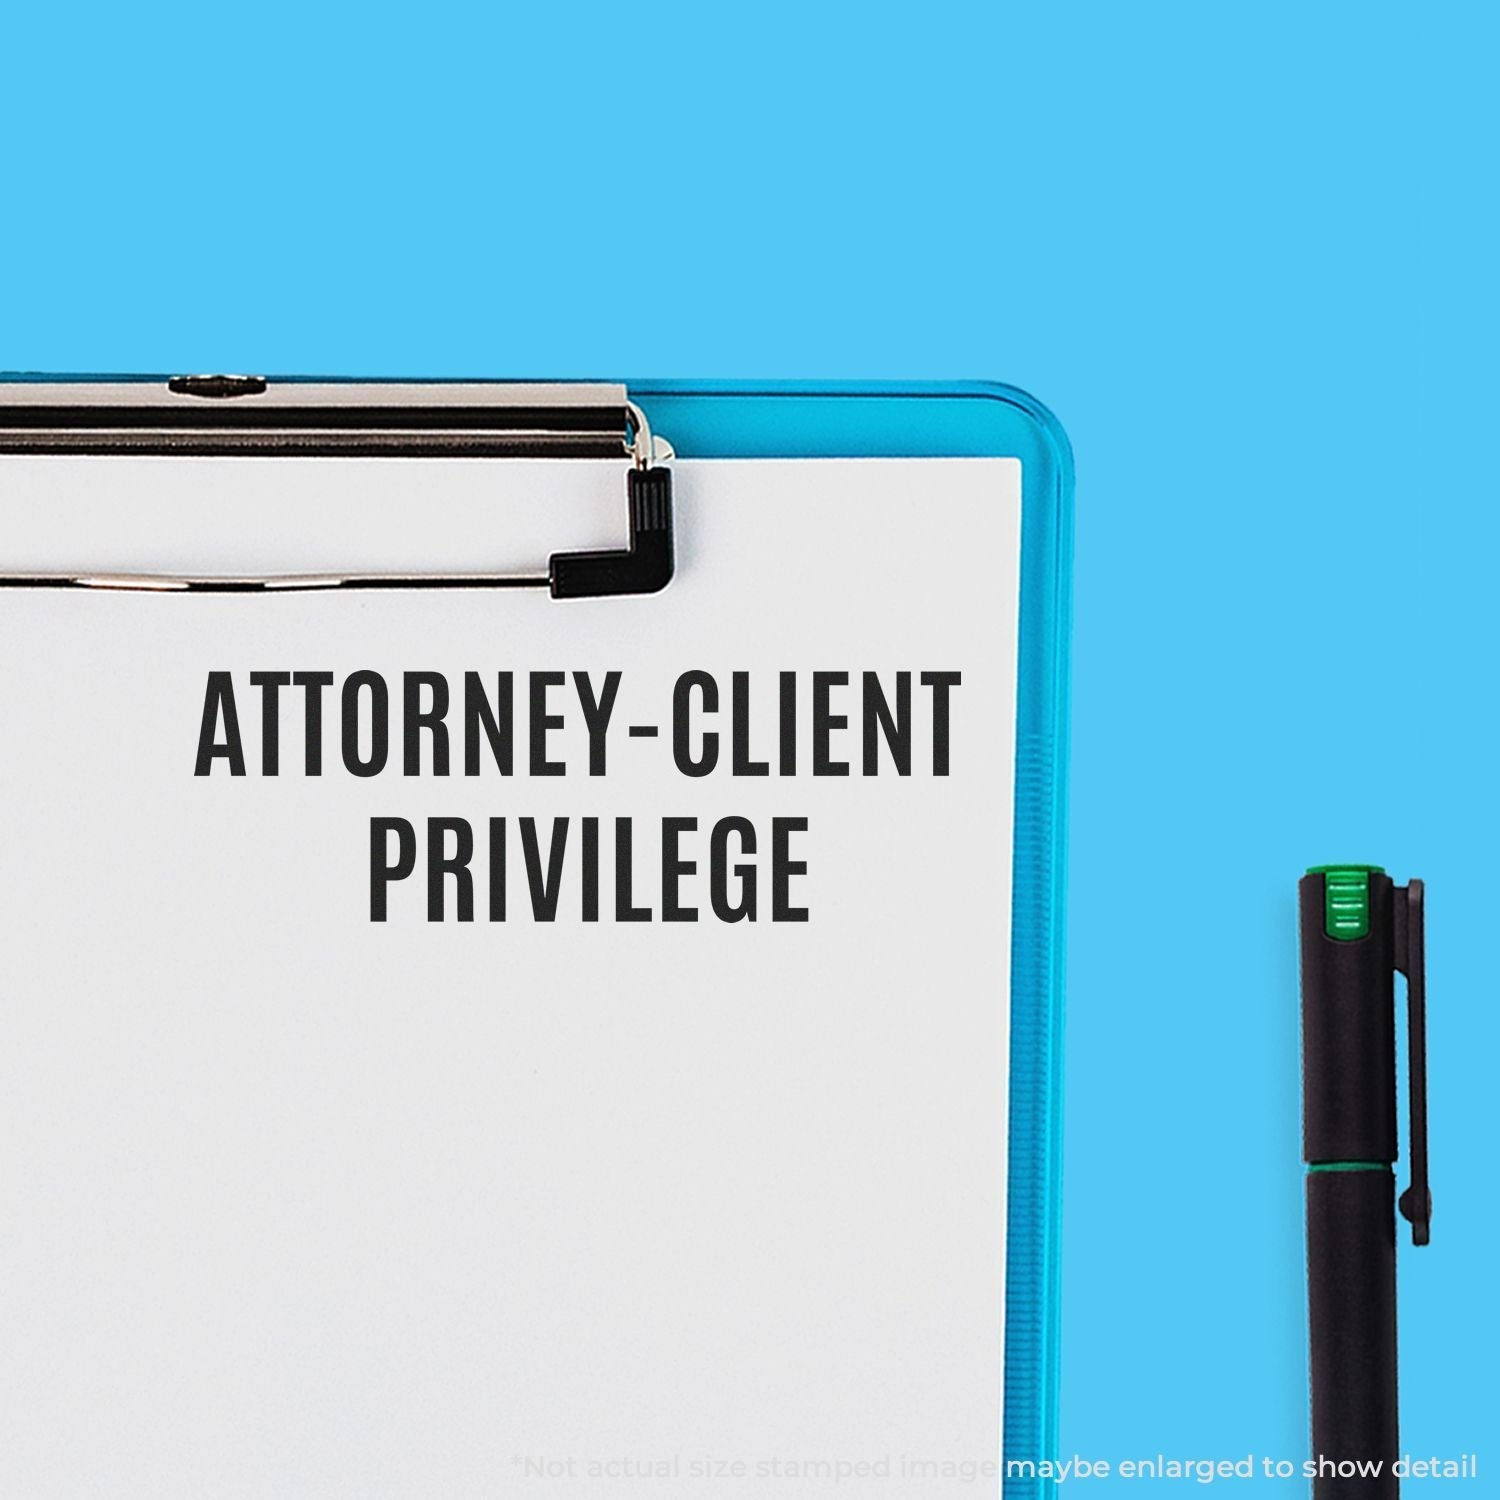 A stock office pre-inked stamp with a stamped image showing how the text "ATTORNEY-CLIENT PRIVILEGE" in a large font is displayed after stamping.